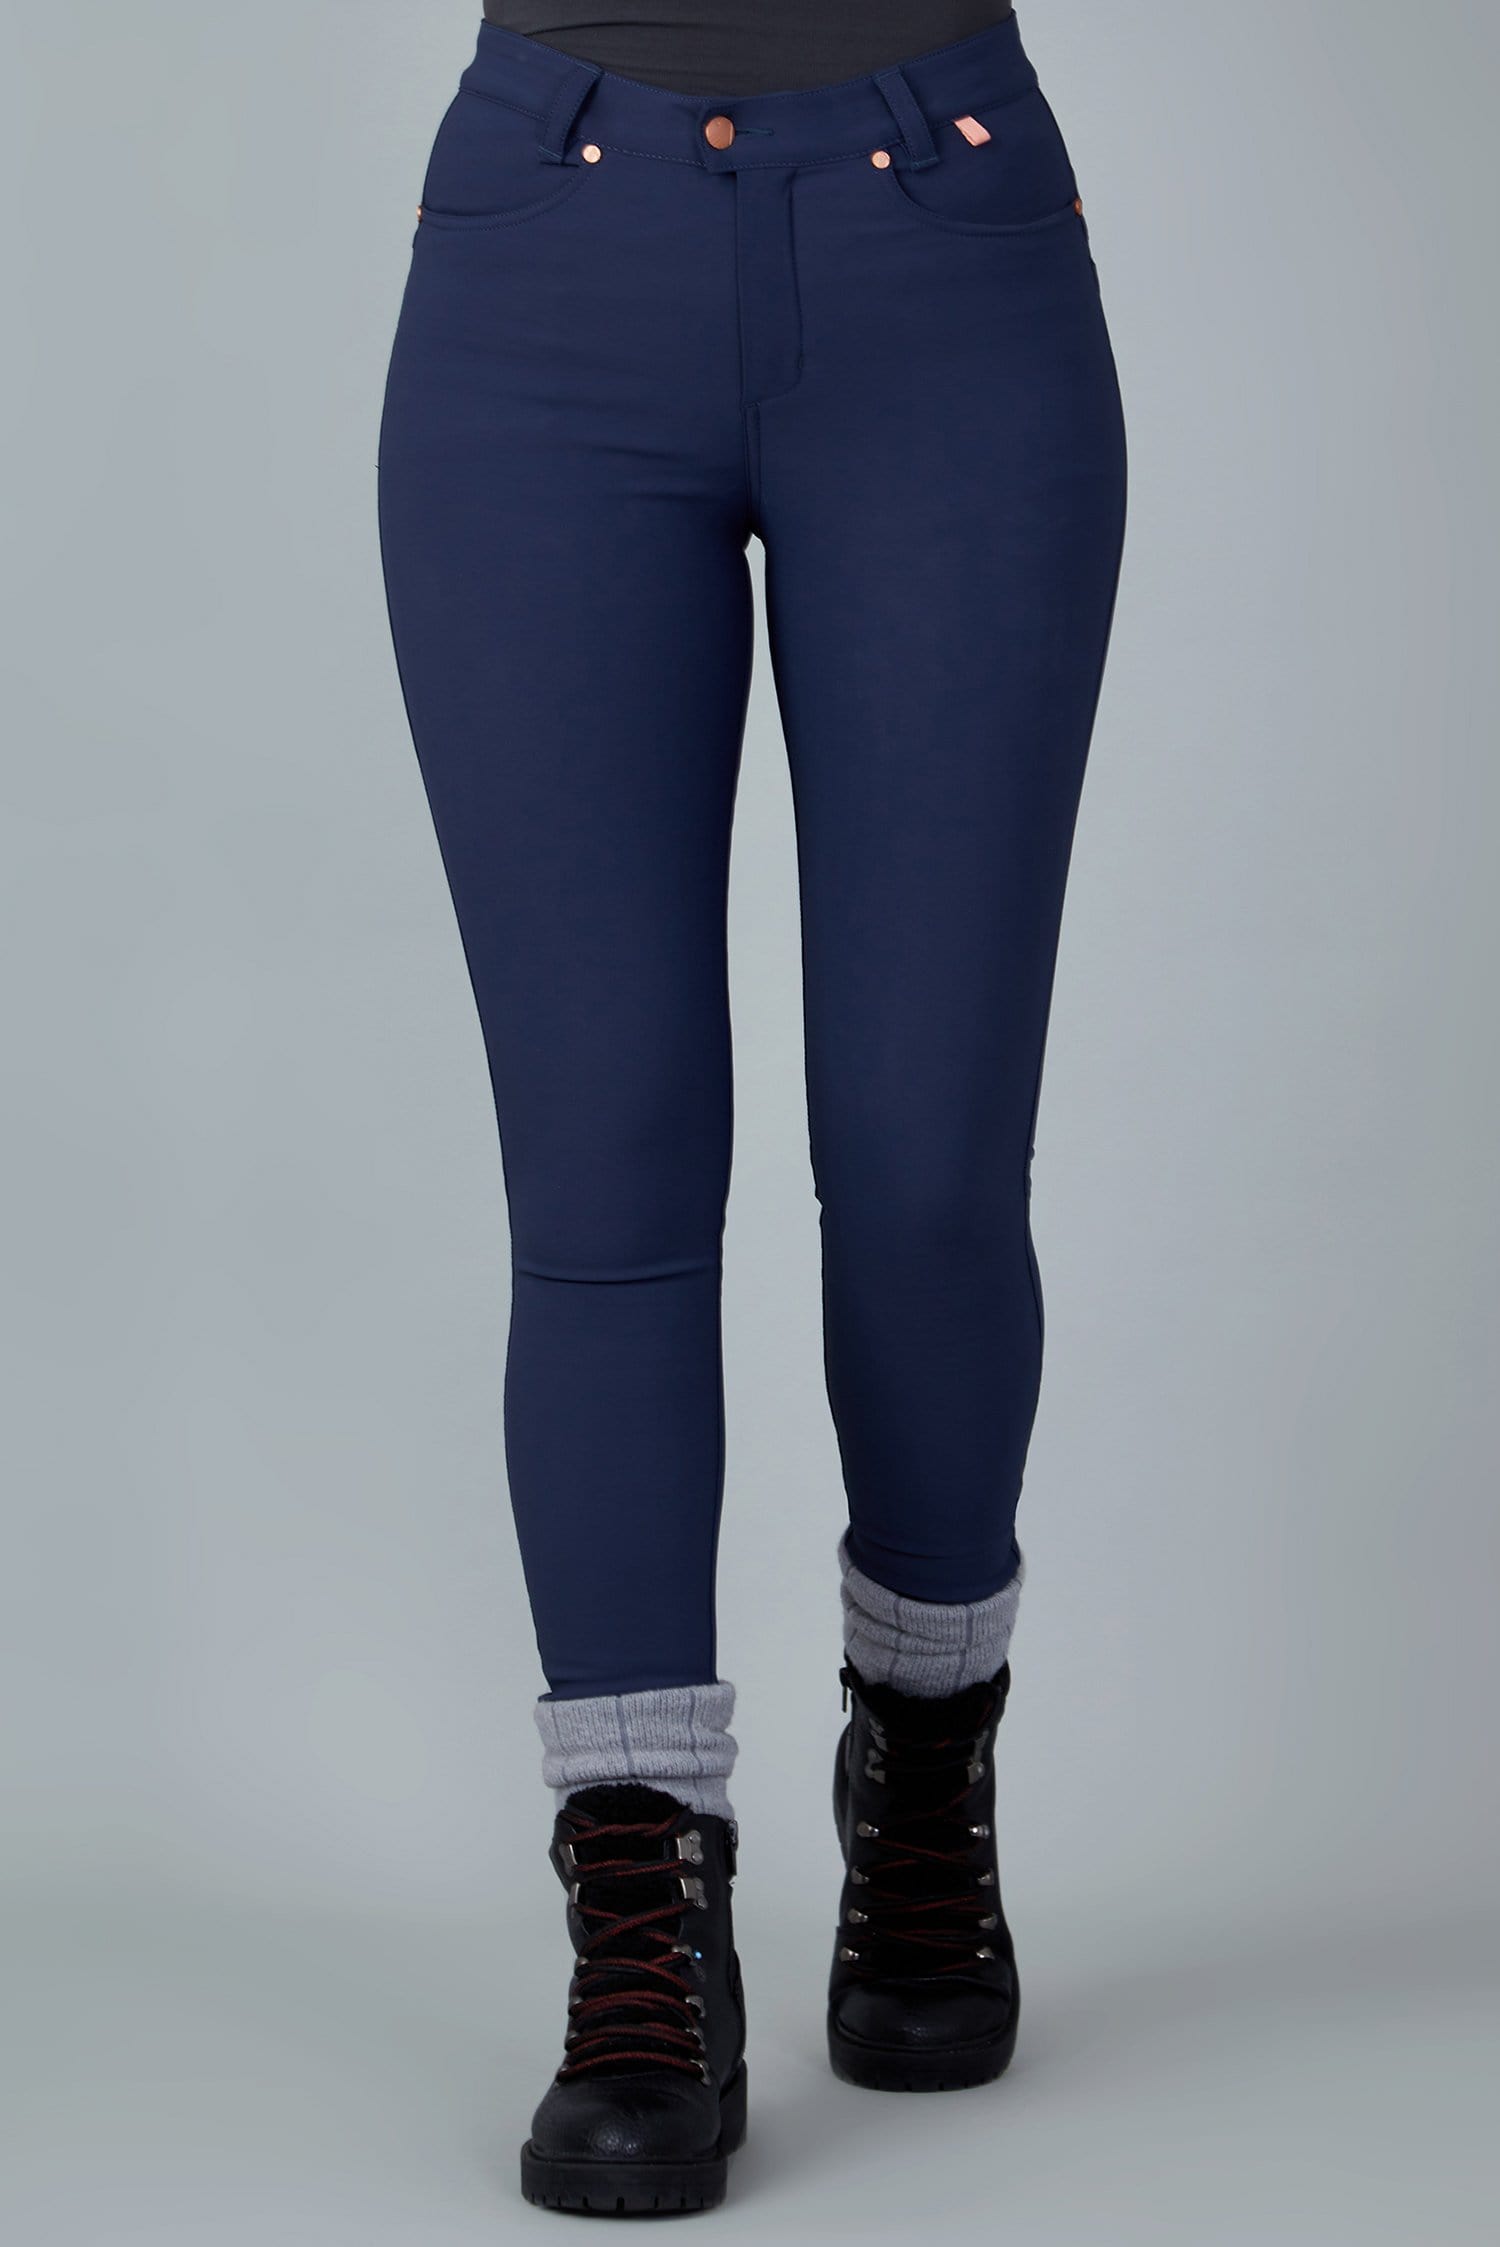 The Aventurite Stretch Skinny Outdoor Trousers - Midnight Blue - 30p / Uk12 - Womens - Acai Outdoorwear